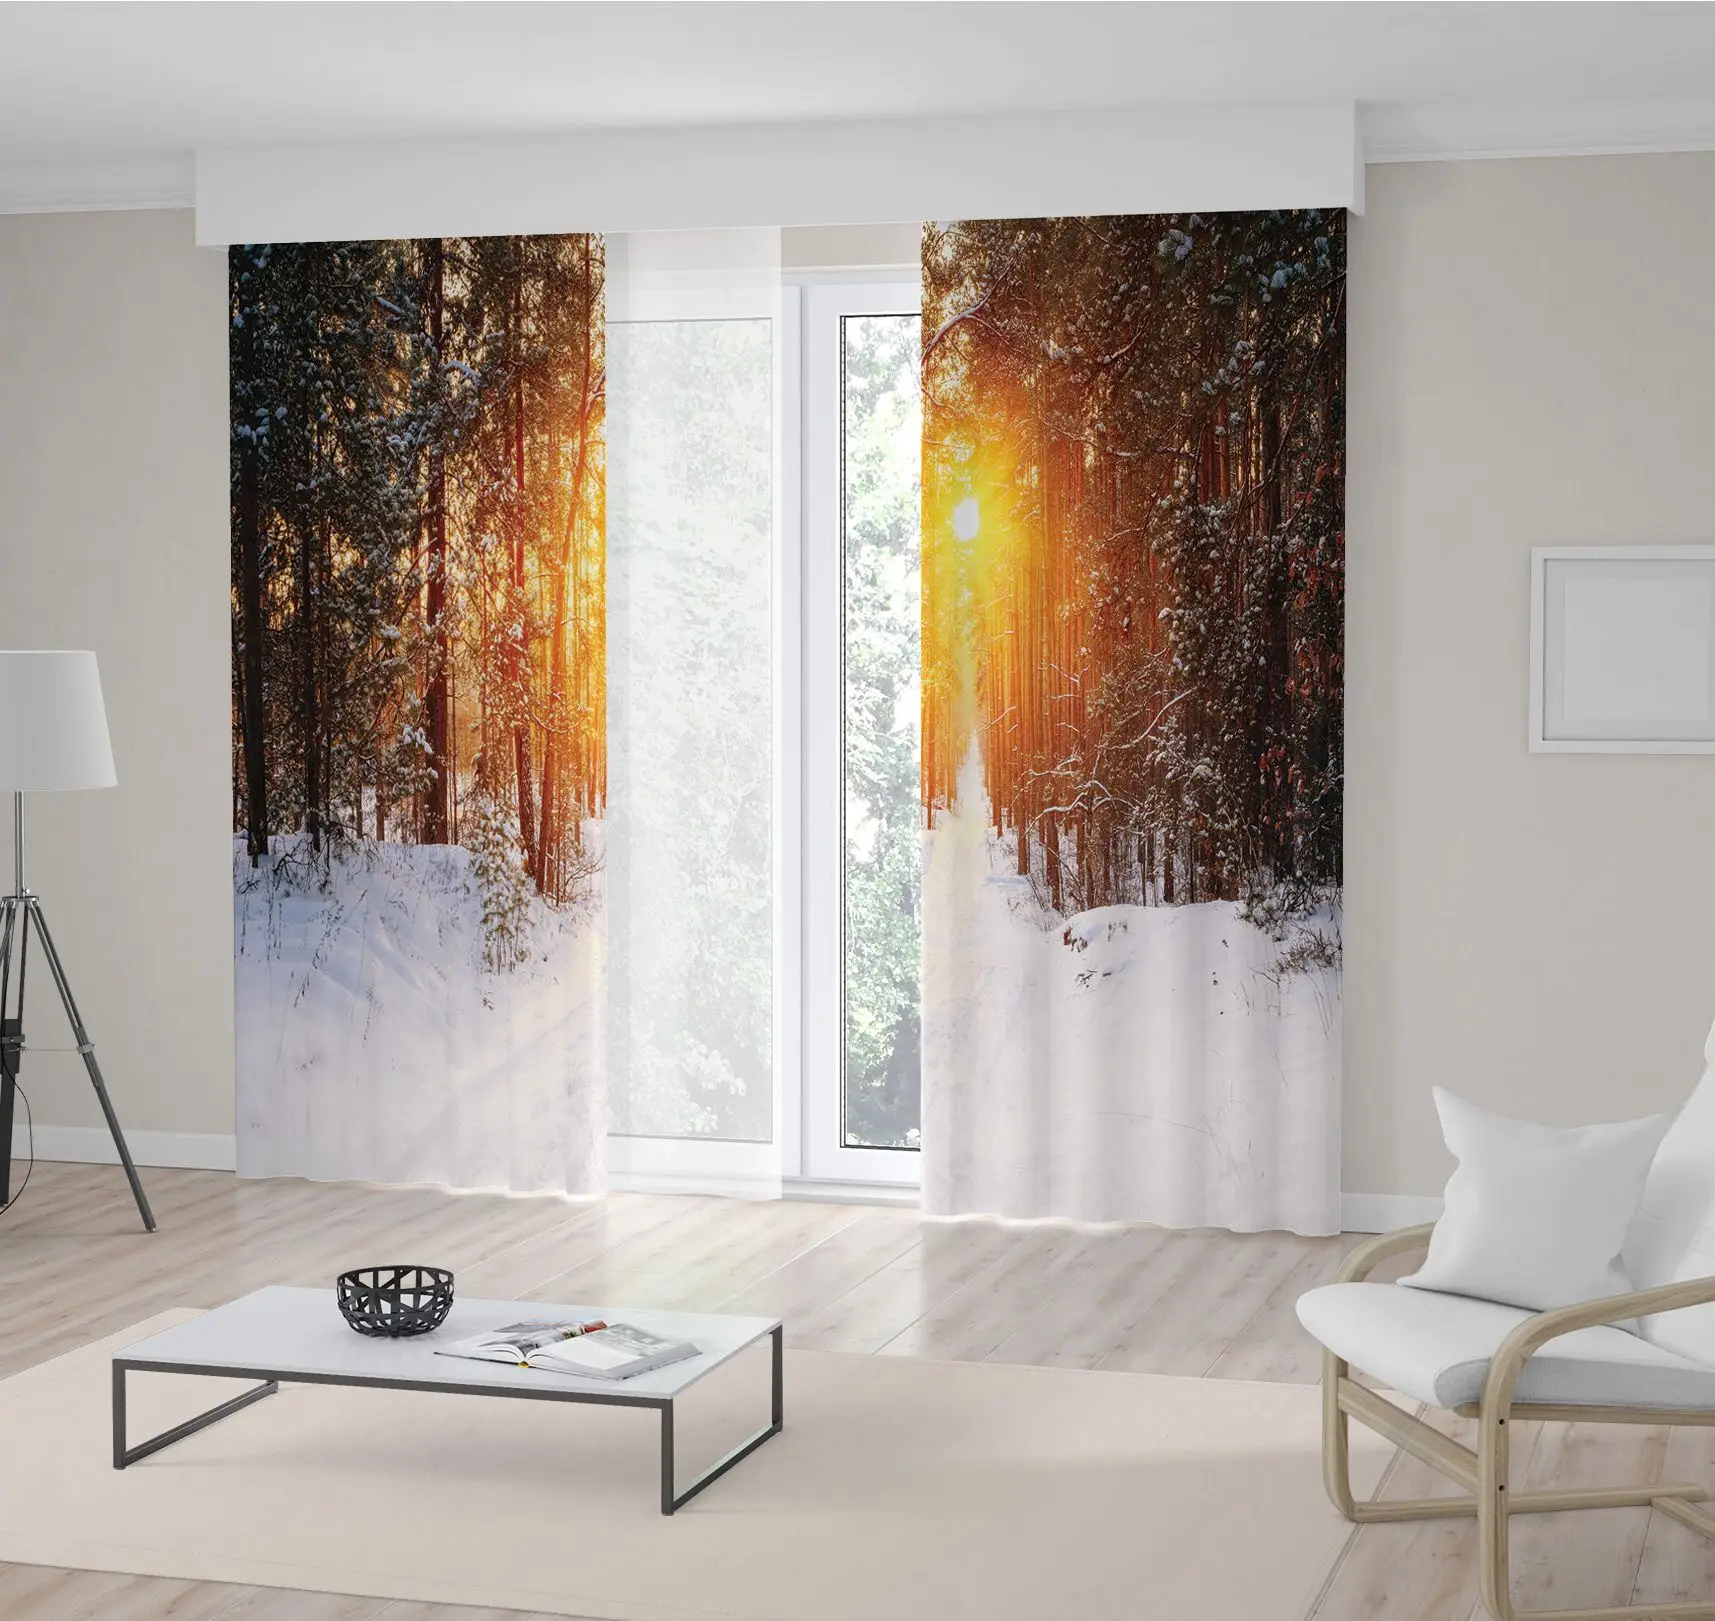 

Curtain in Sunrise Forest Evergreen Pine Trees Snowy Winter Morning Landscape Nature Picture